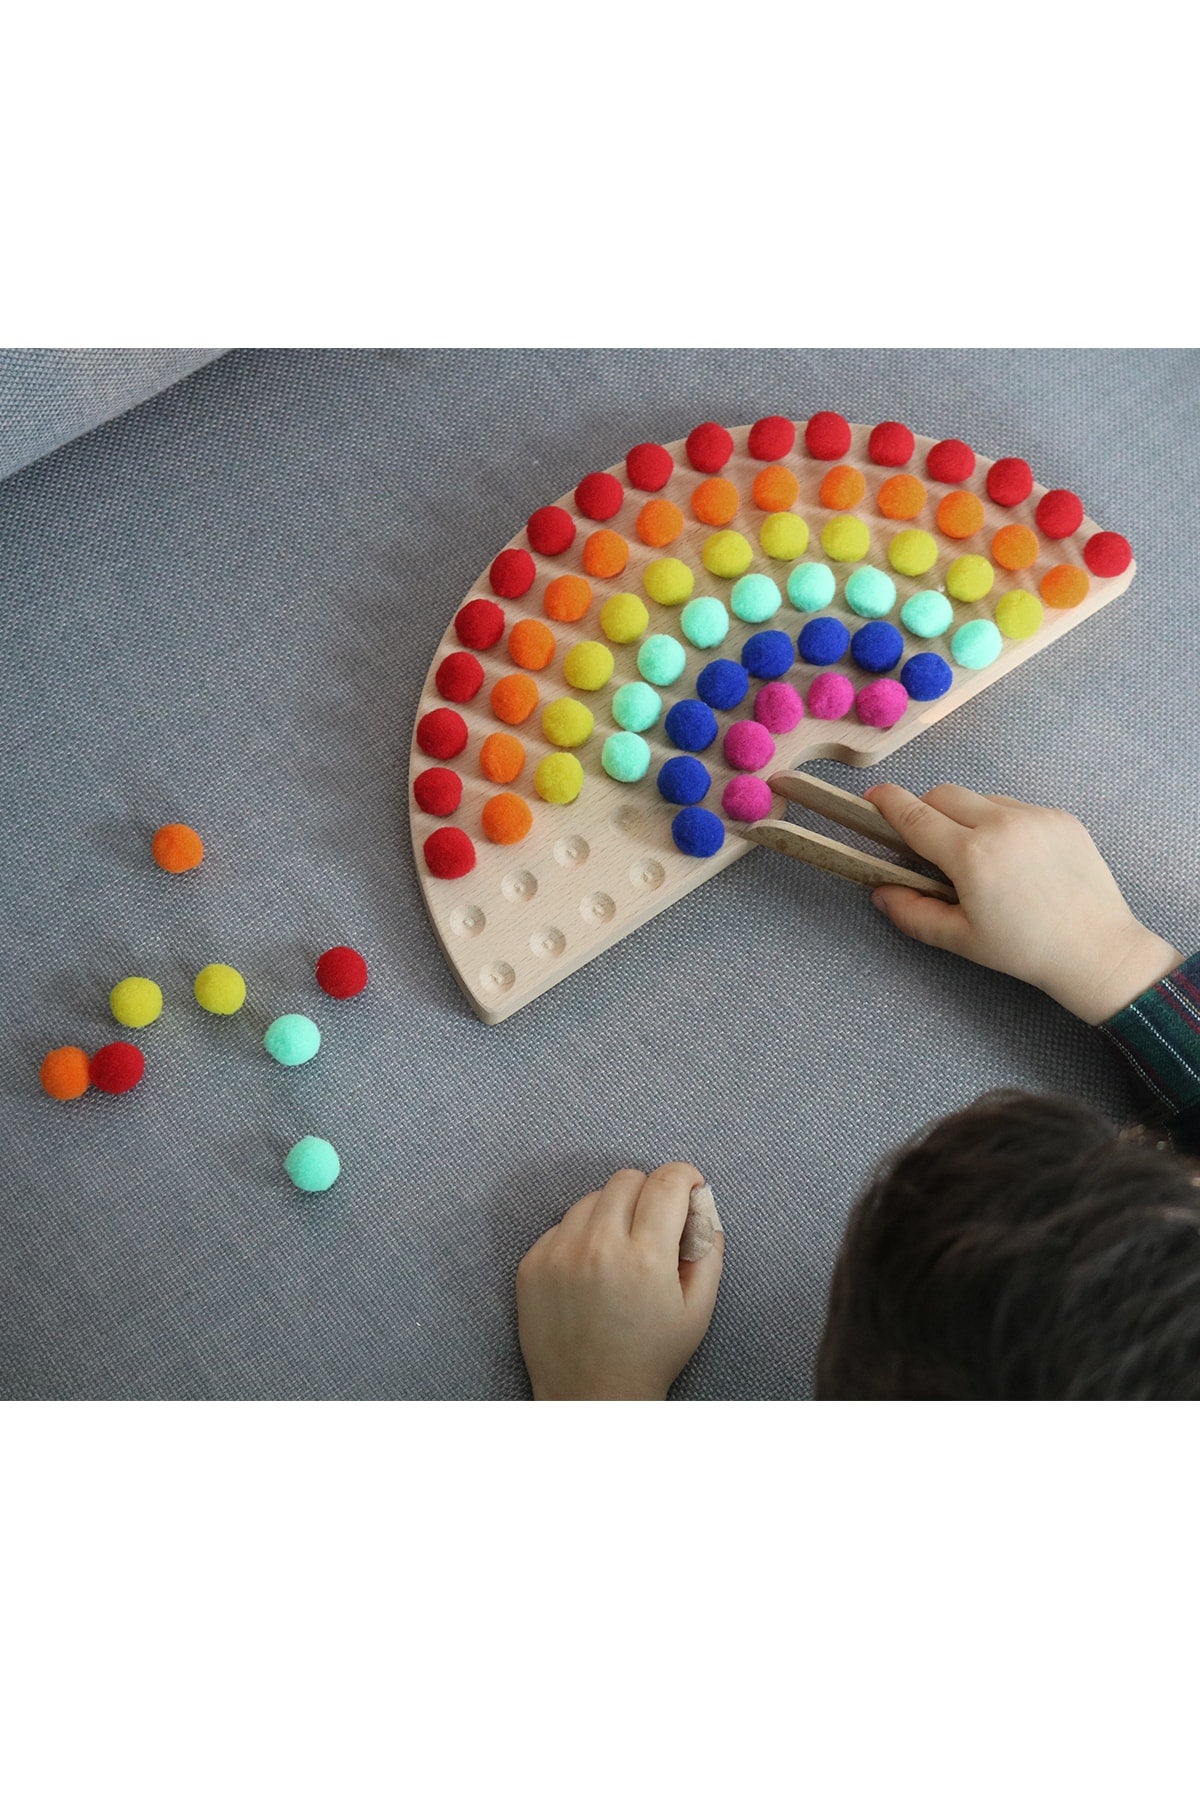 Montessori Educational Wooden Toy – Wooden Rainbow And Colorful Felt Balls